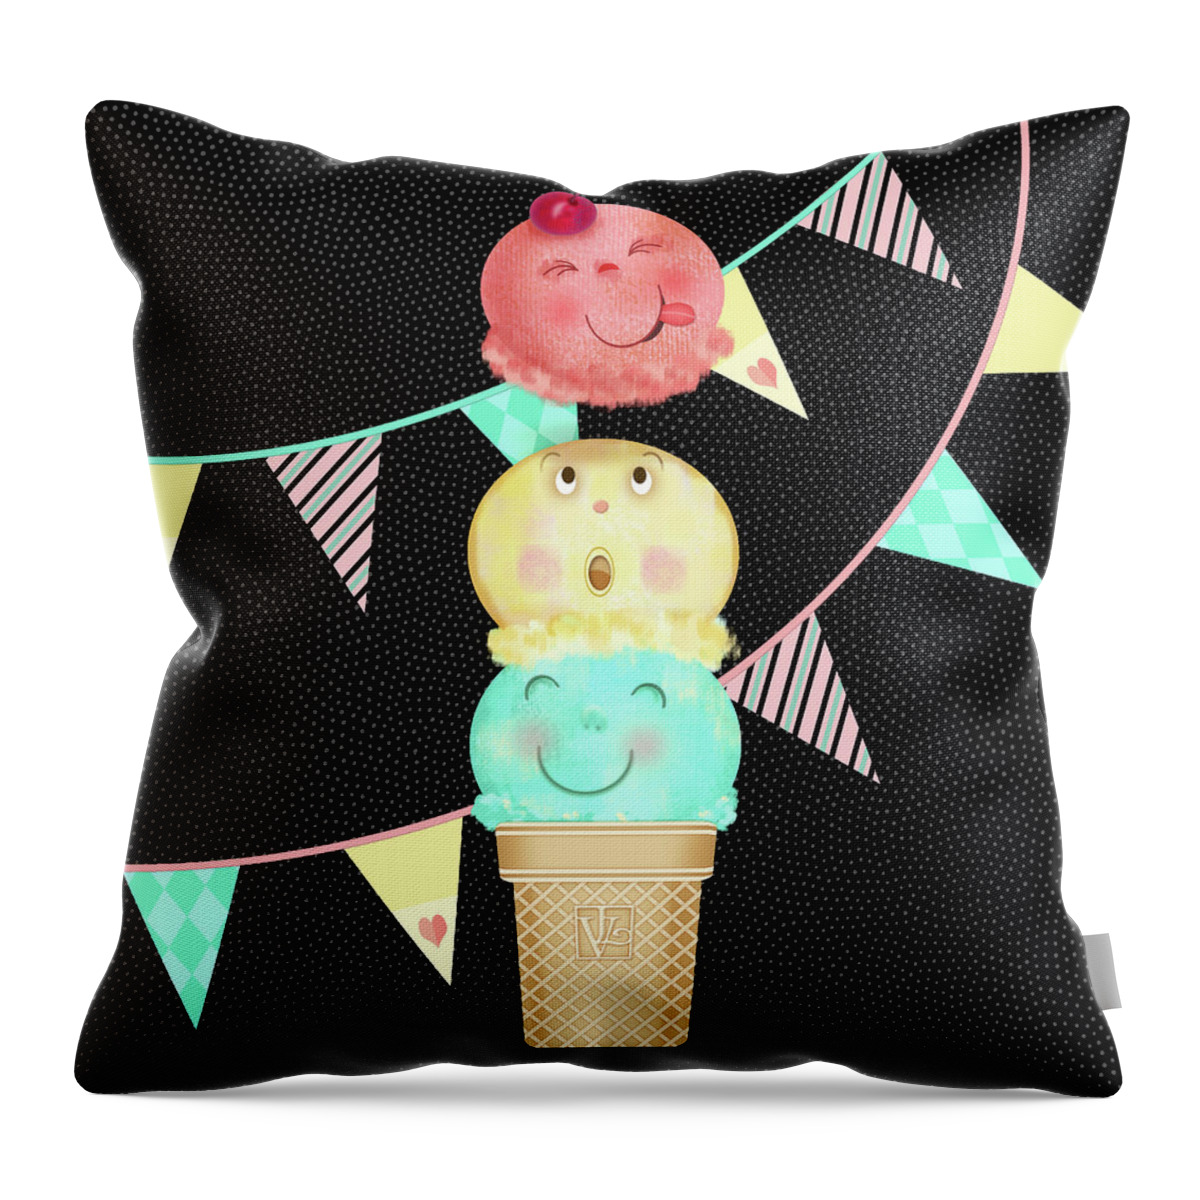 Ice Cream Throw Pillow featuring the digital art I is for Ice Cream Cone by Valerie Drake Lesiak